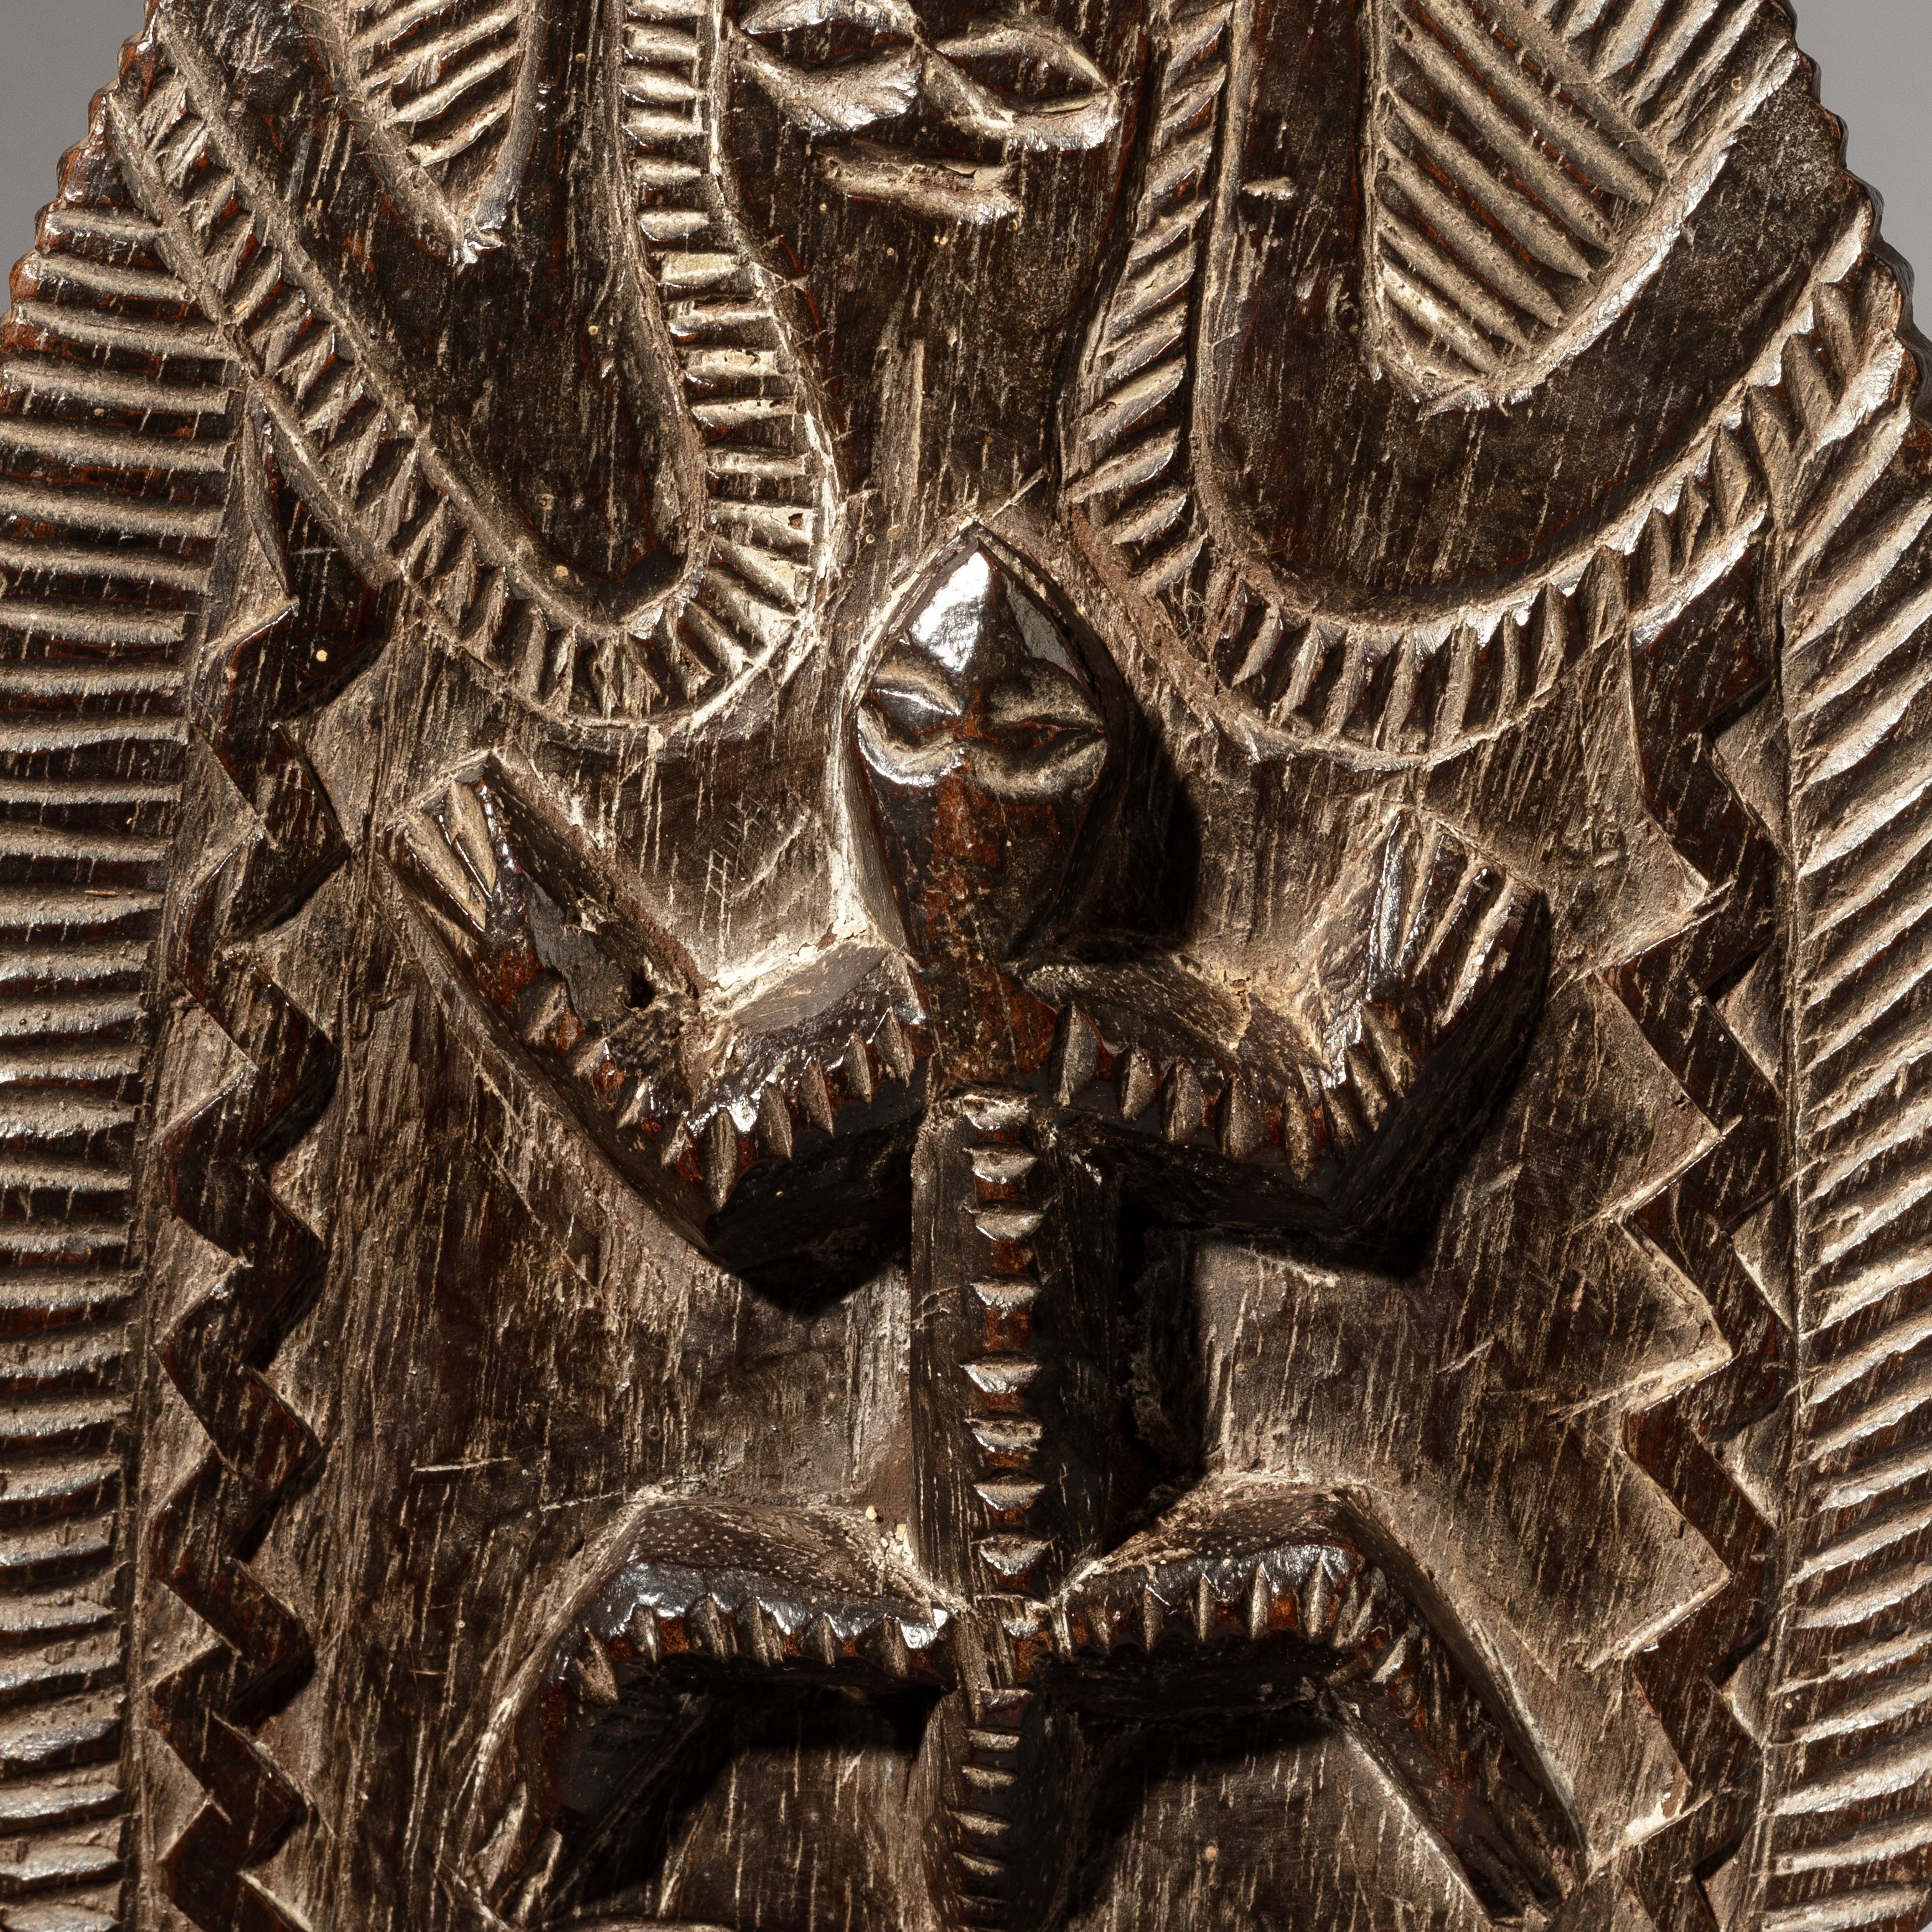 A FINELY ENGRAVED kOLA NUT CONTAINER FROM YORUBA TRIBE NIGERIA, WEST AFRICA ( No 1322)